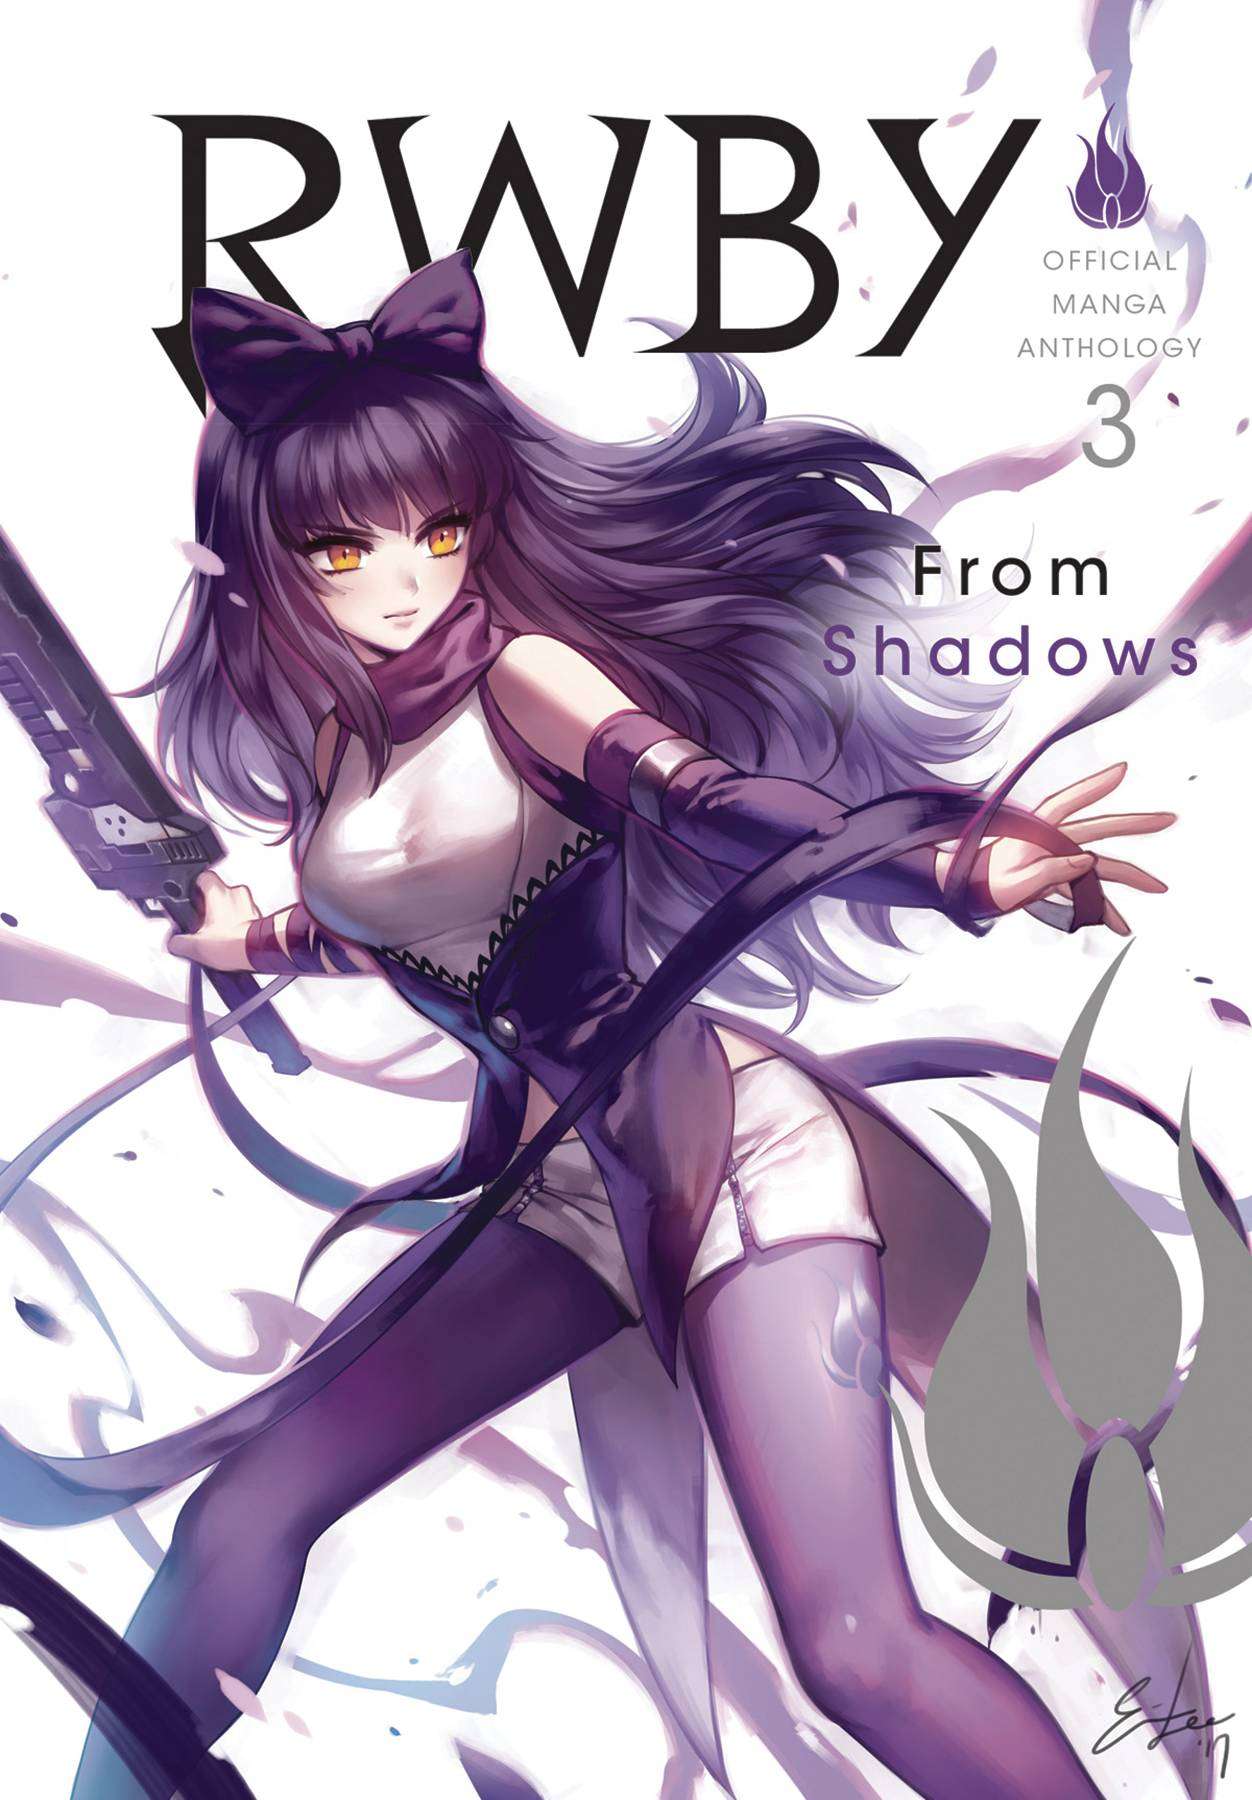 RWBY OFFICIAL MANGA ANTHOLOGY GN 03 FROM SHADOWS